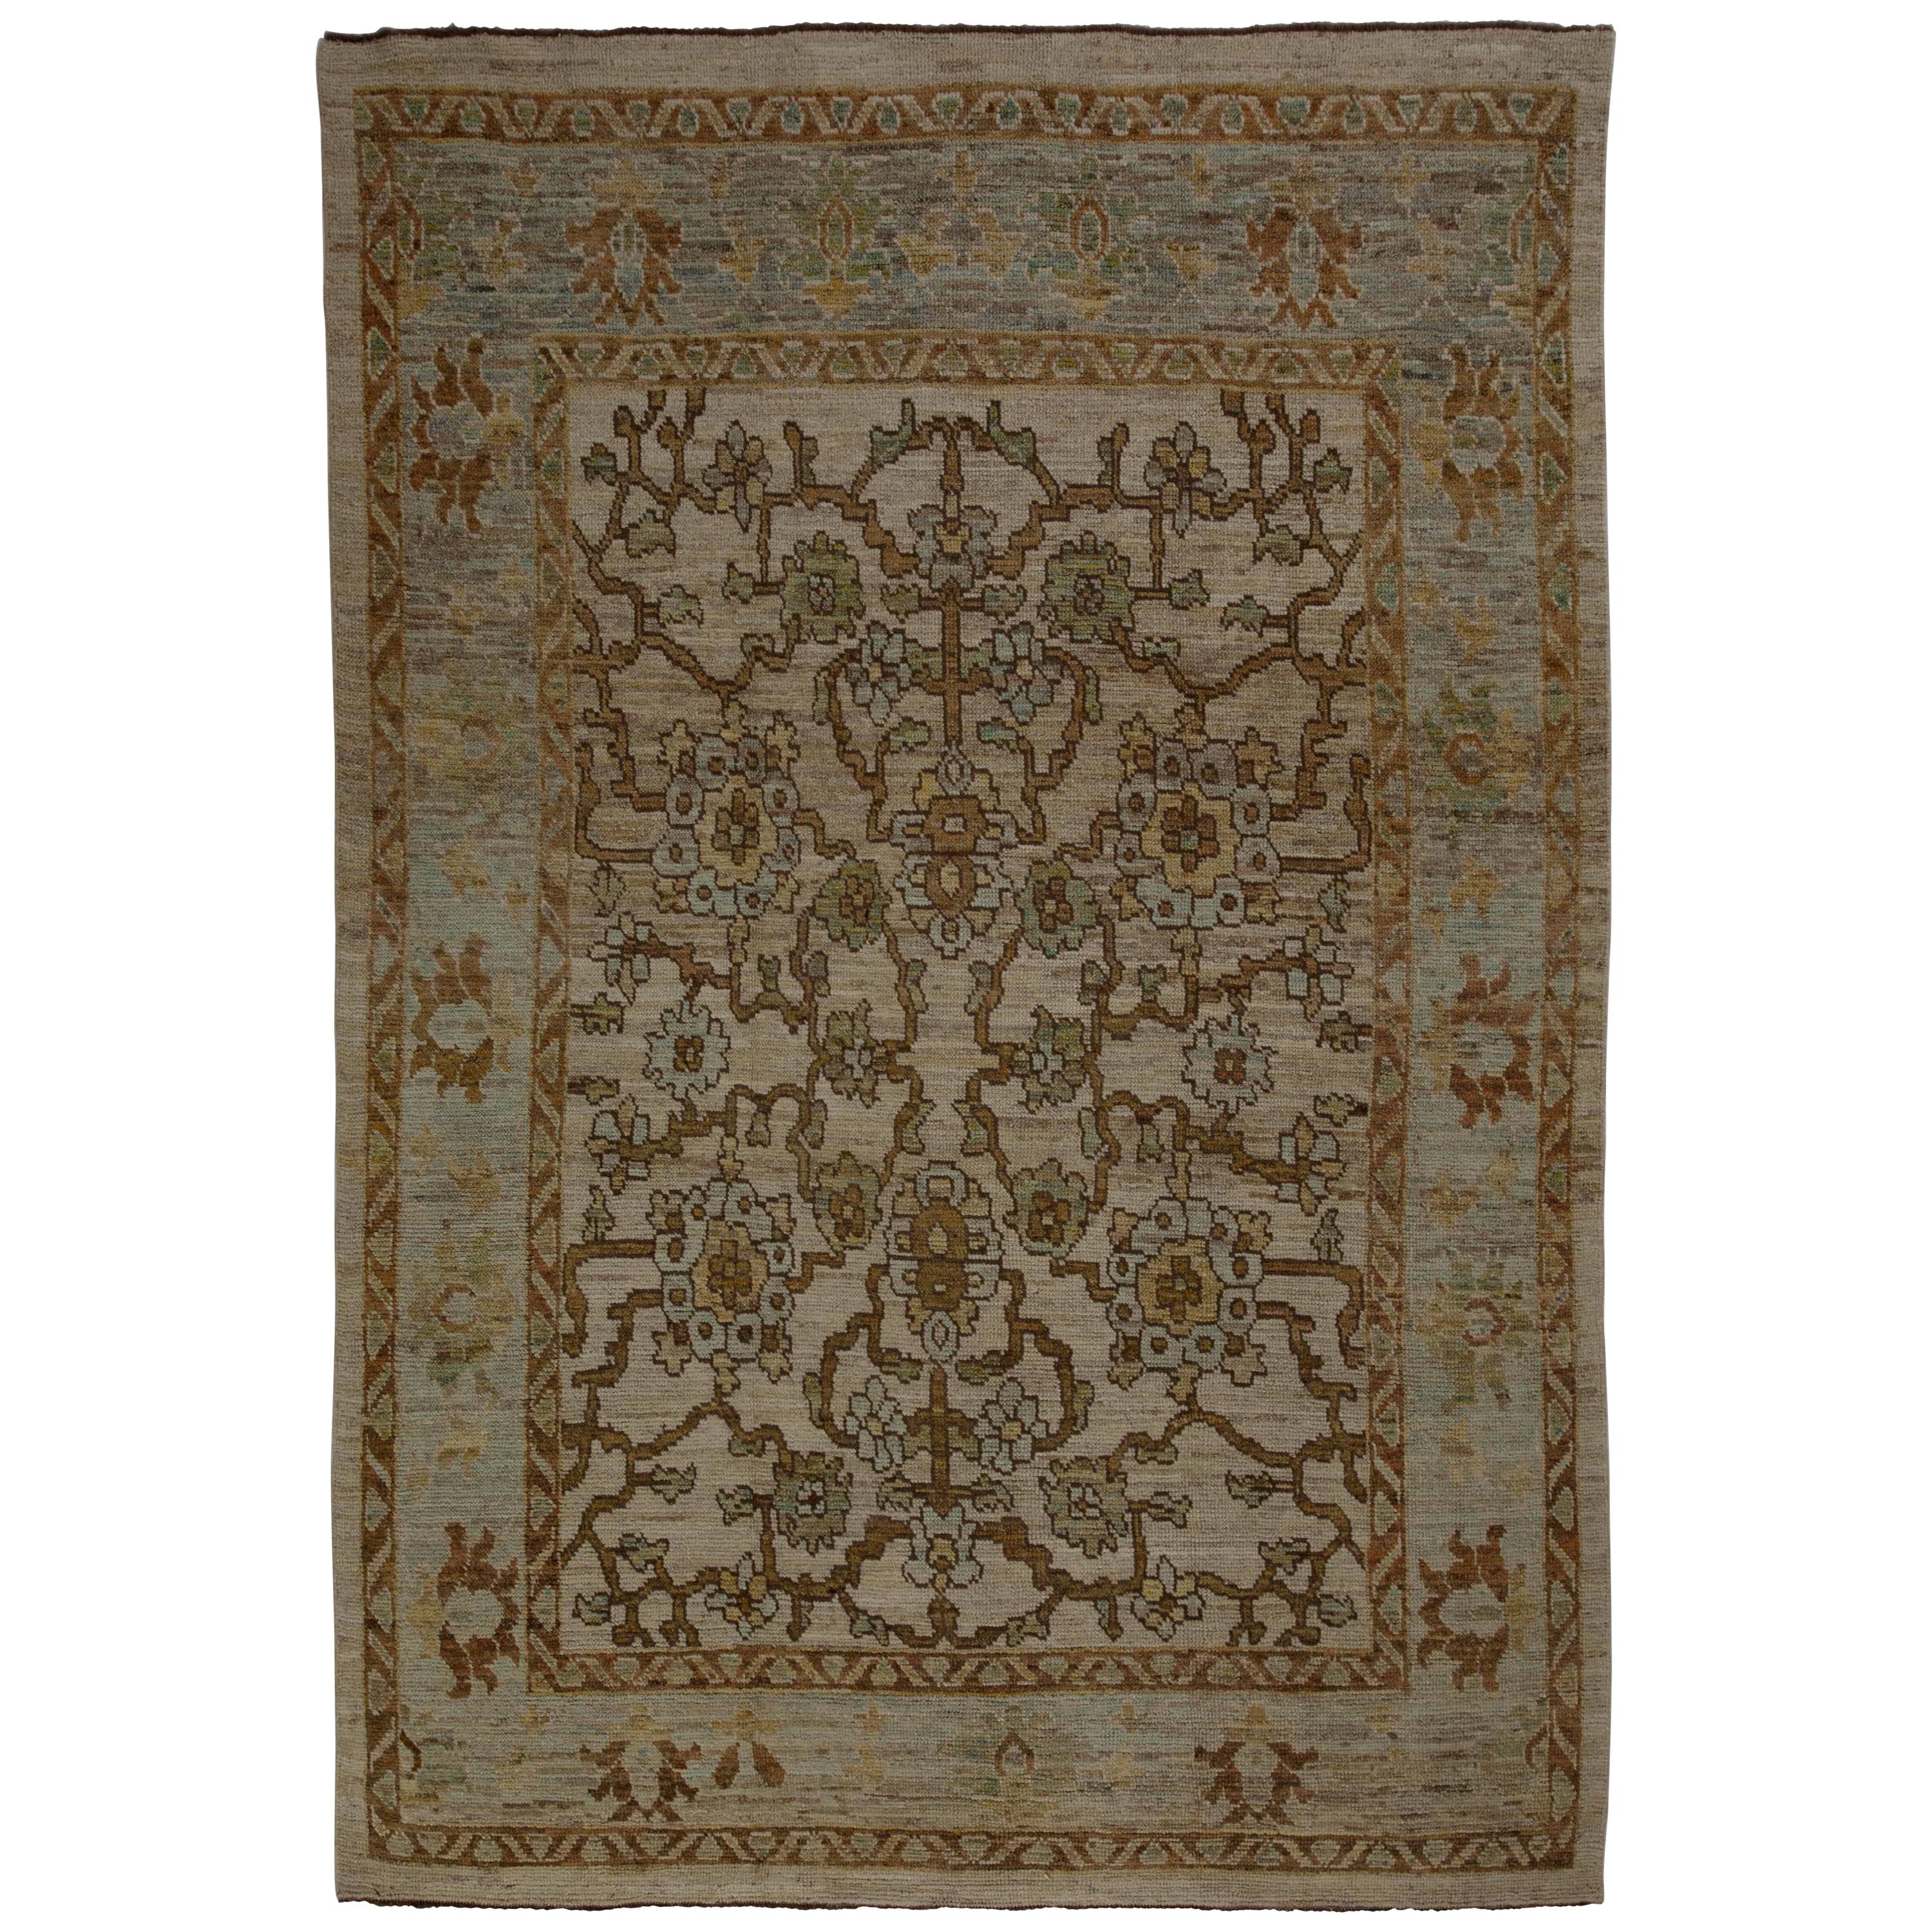 Contemporary Turkish Rug Oushak Weave with Blue and Green Floral Details